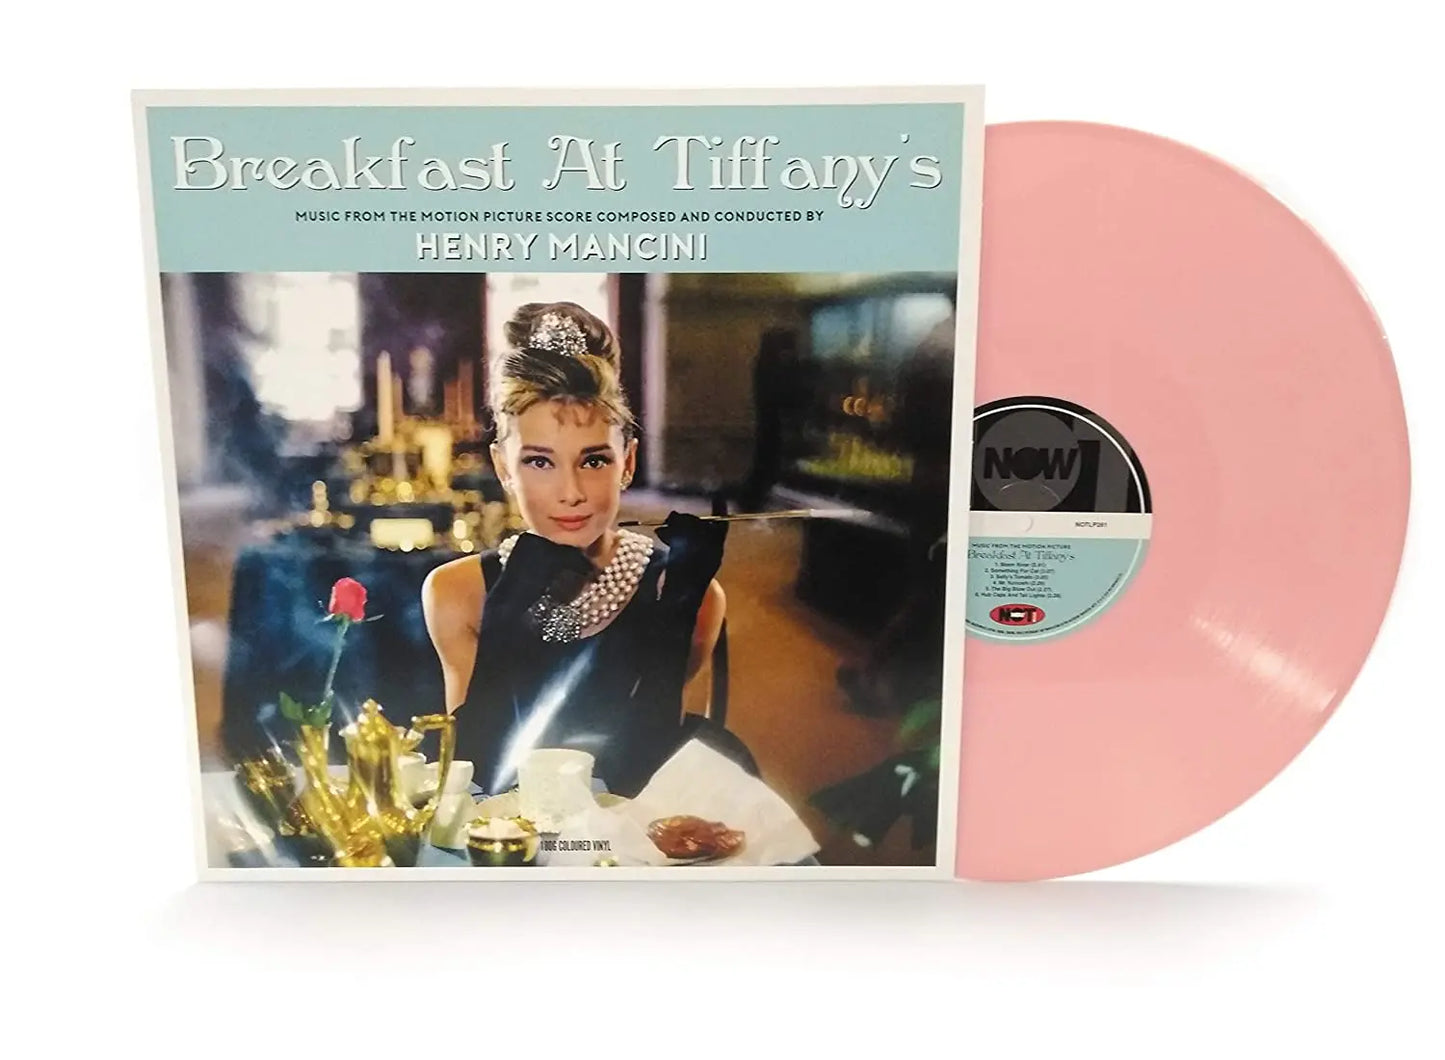 Henry Mancini - Breakfast at Tiffany's (Music From the Motion Picture Score) [180 Gram-Vinyl, Colored Import]